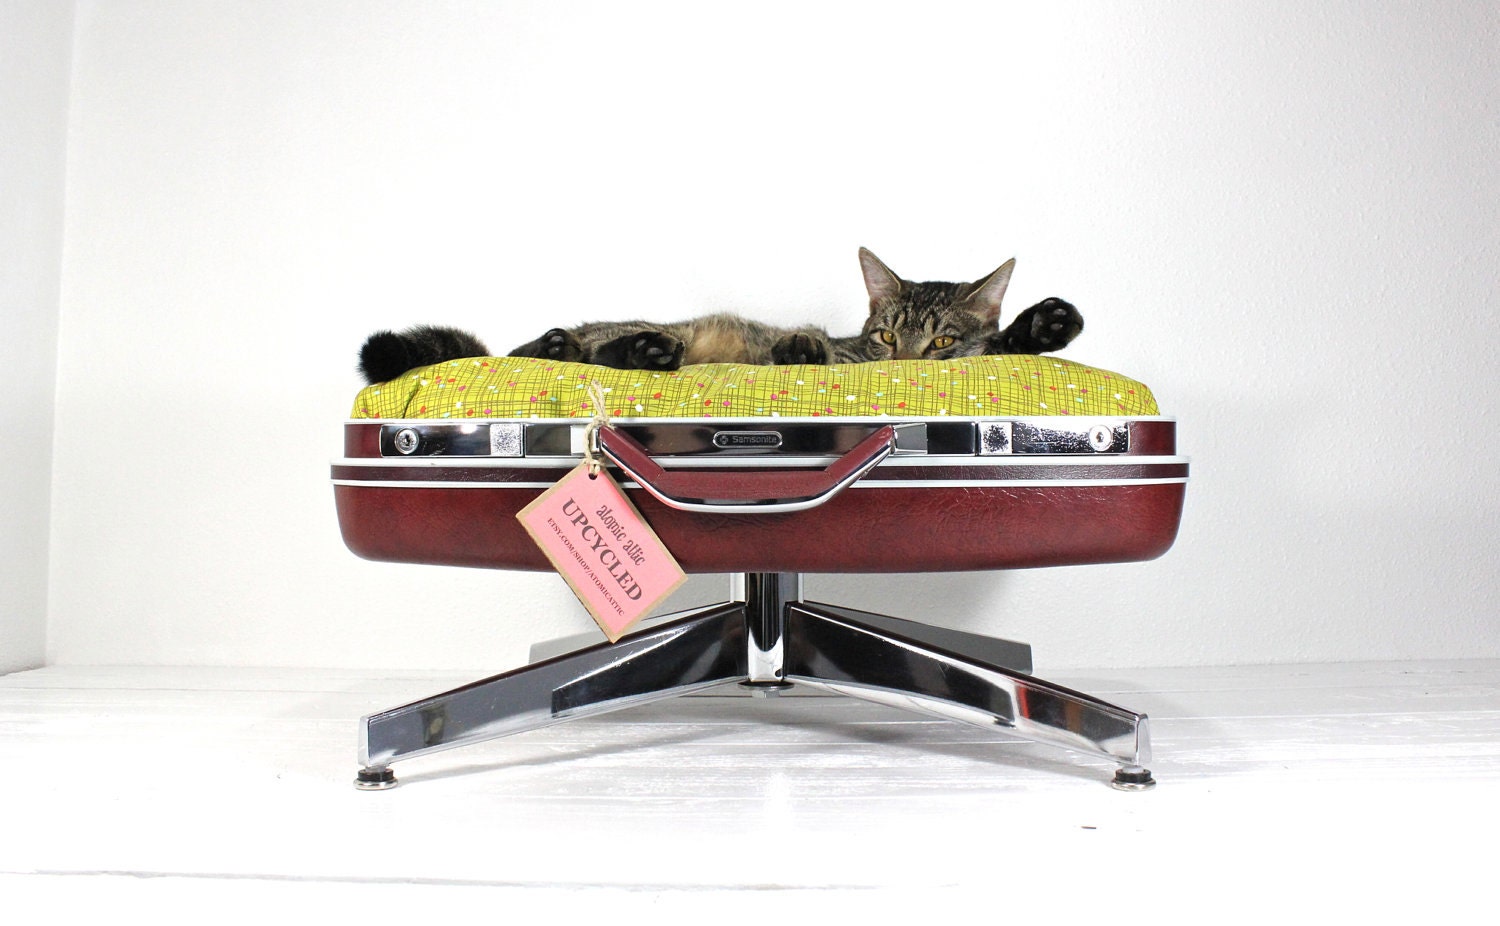 Upcycled Suitcase Pet Bed with Pedestal Base